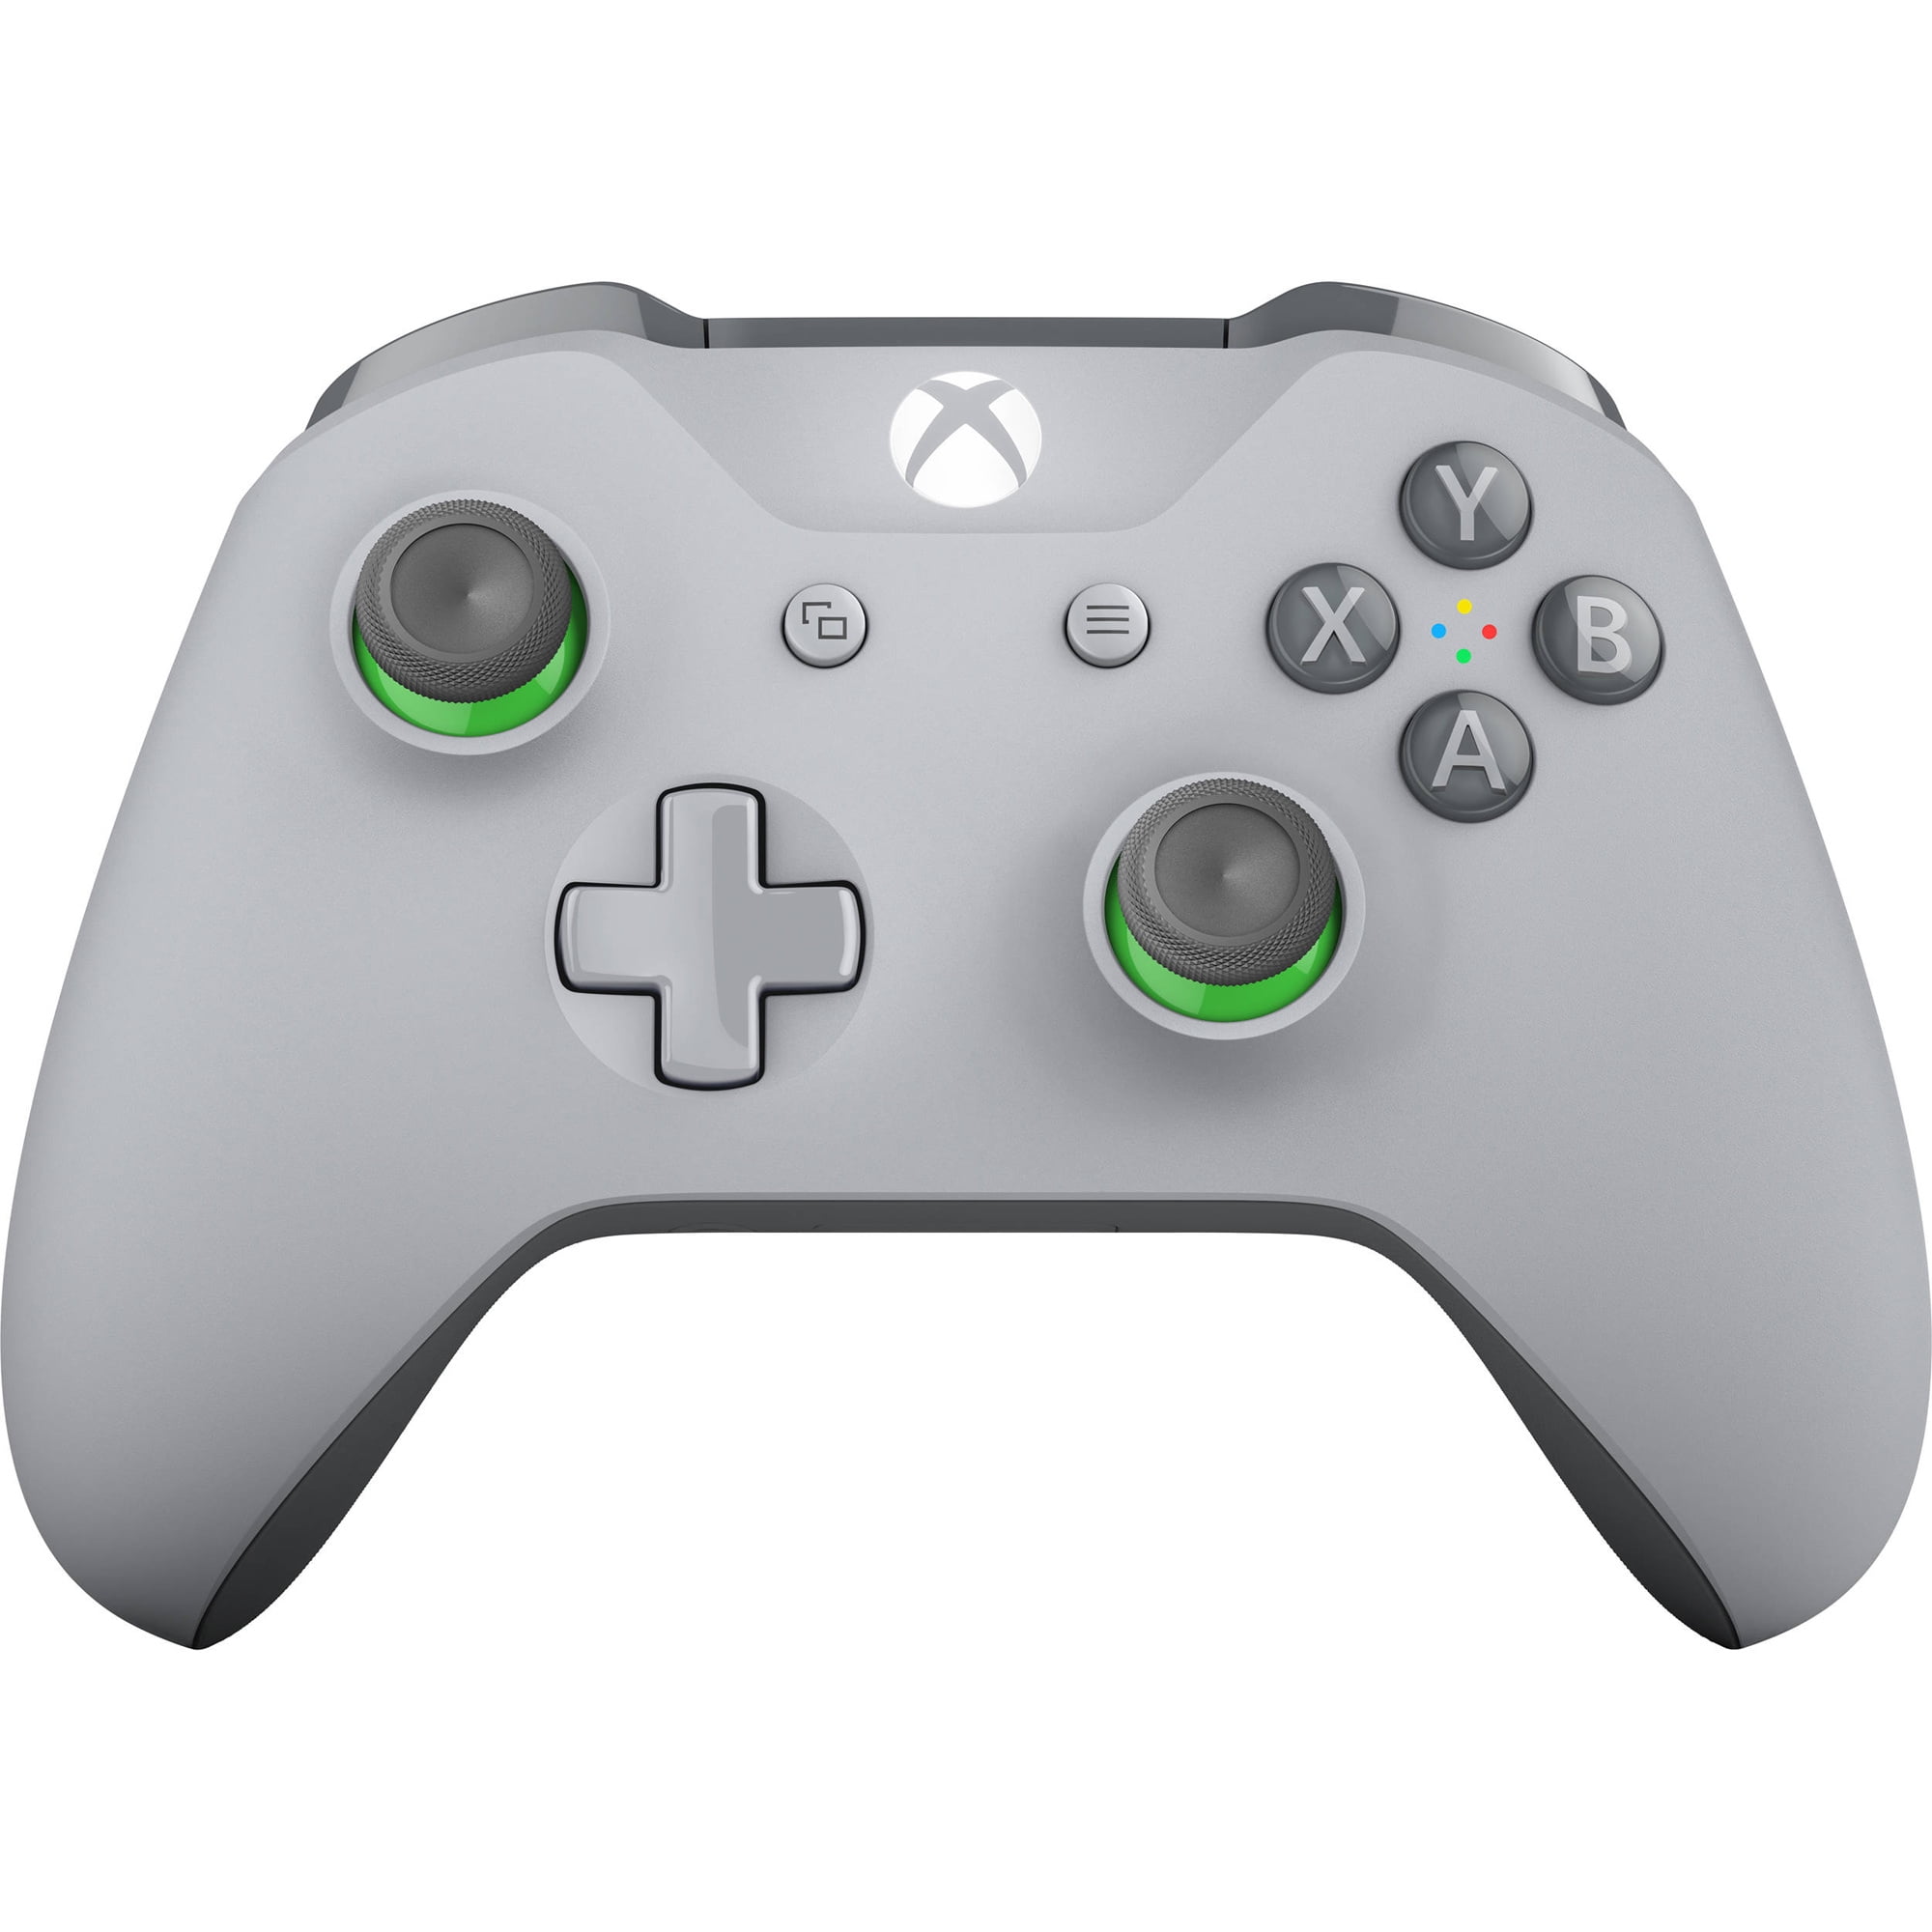 xbox one controller walmart in store